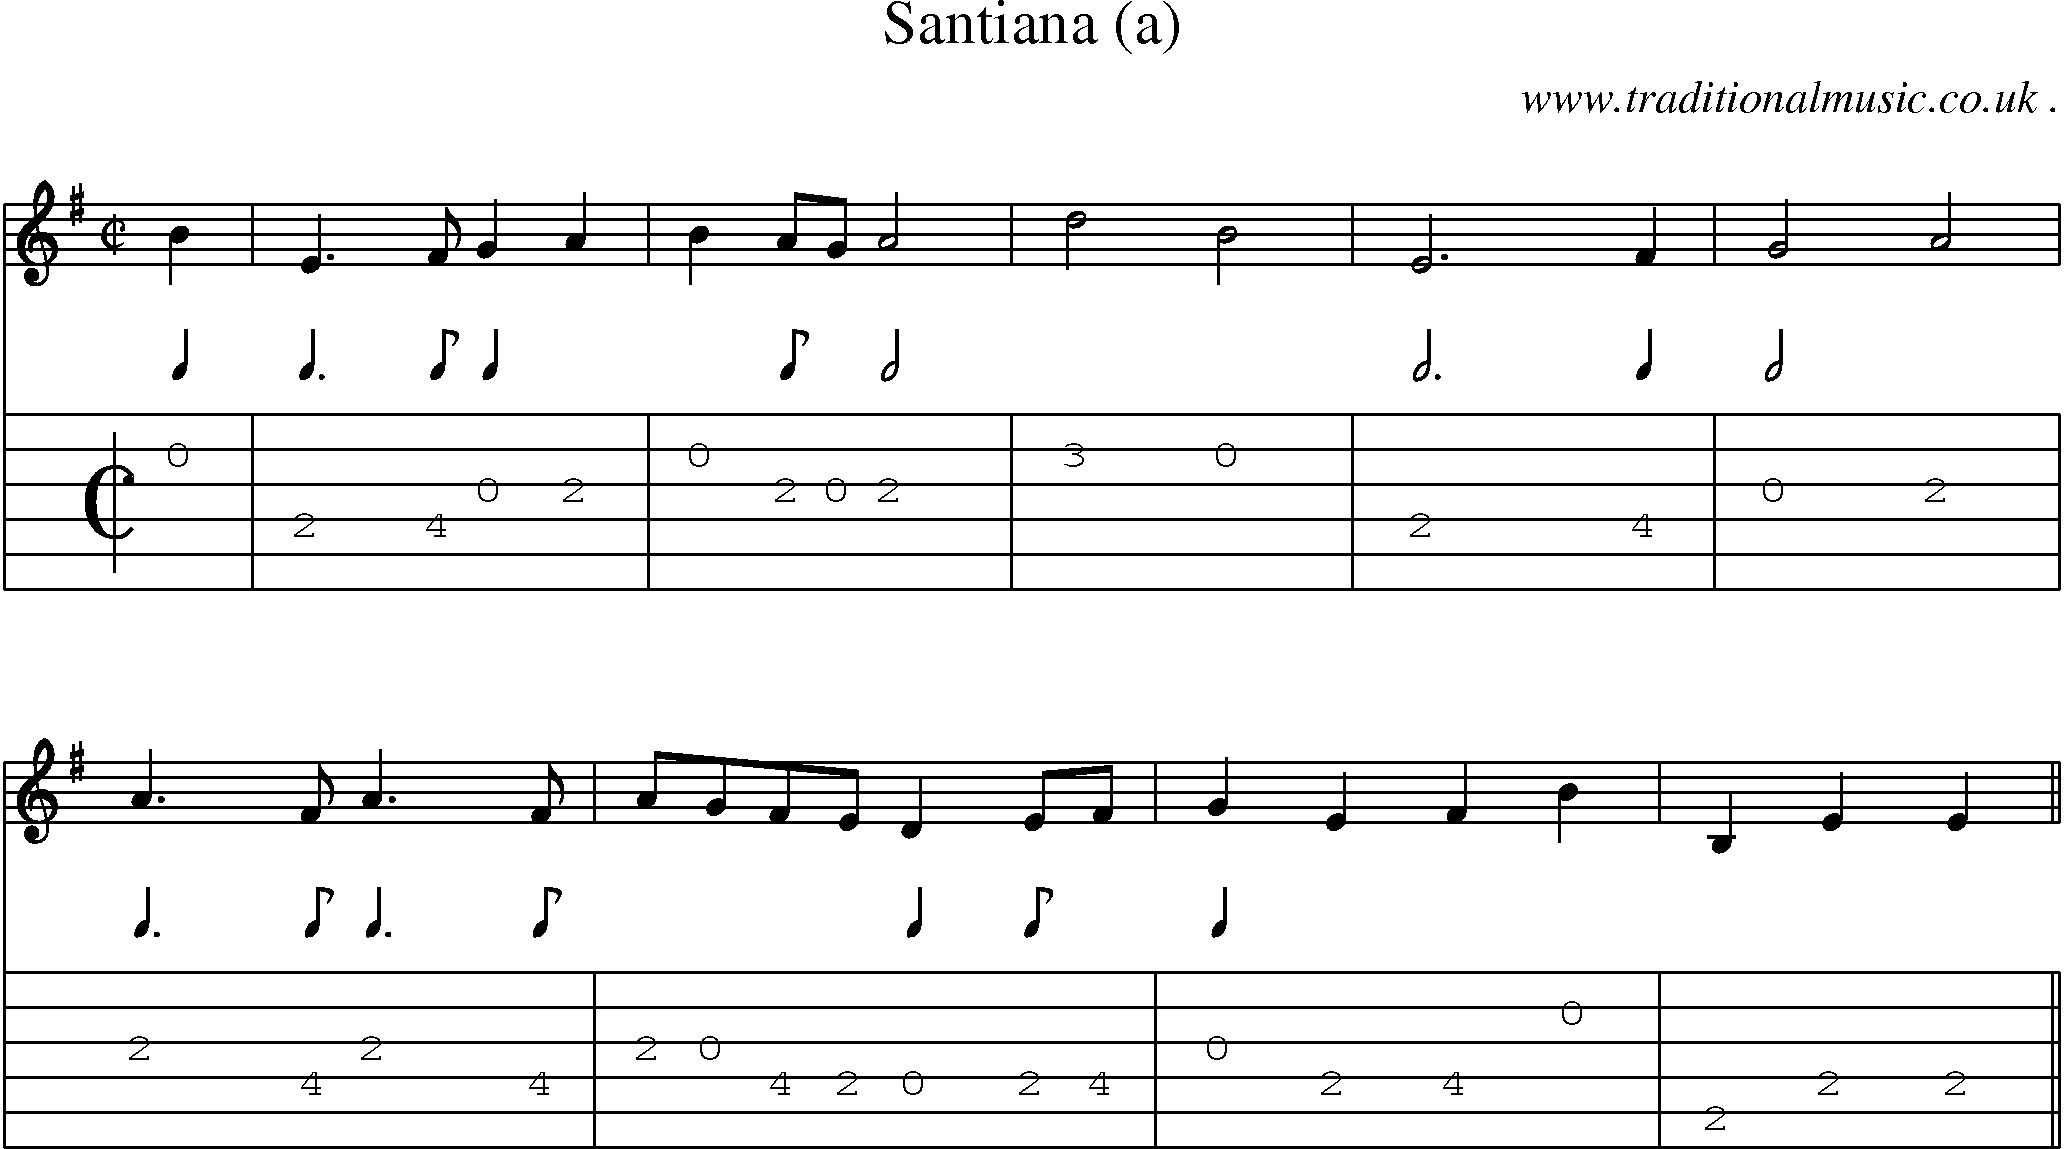 Sheet-Music and Guitar Tabs for Santiana (a)